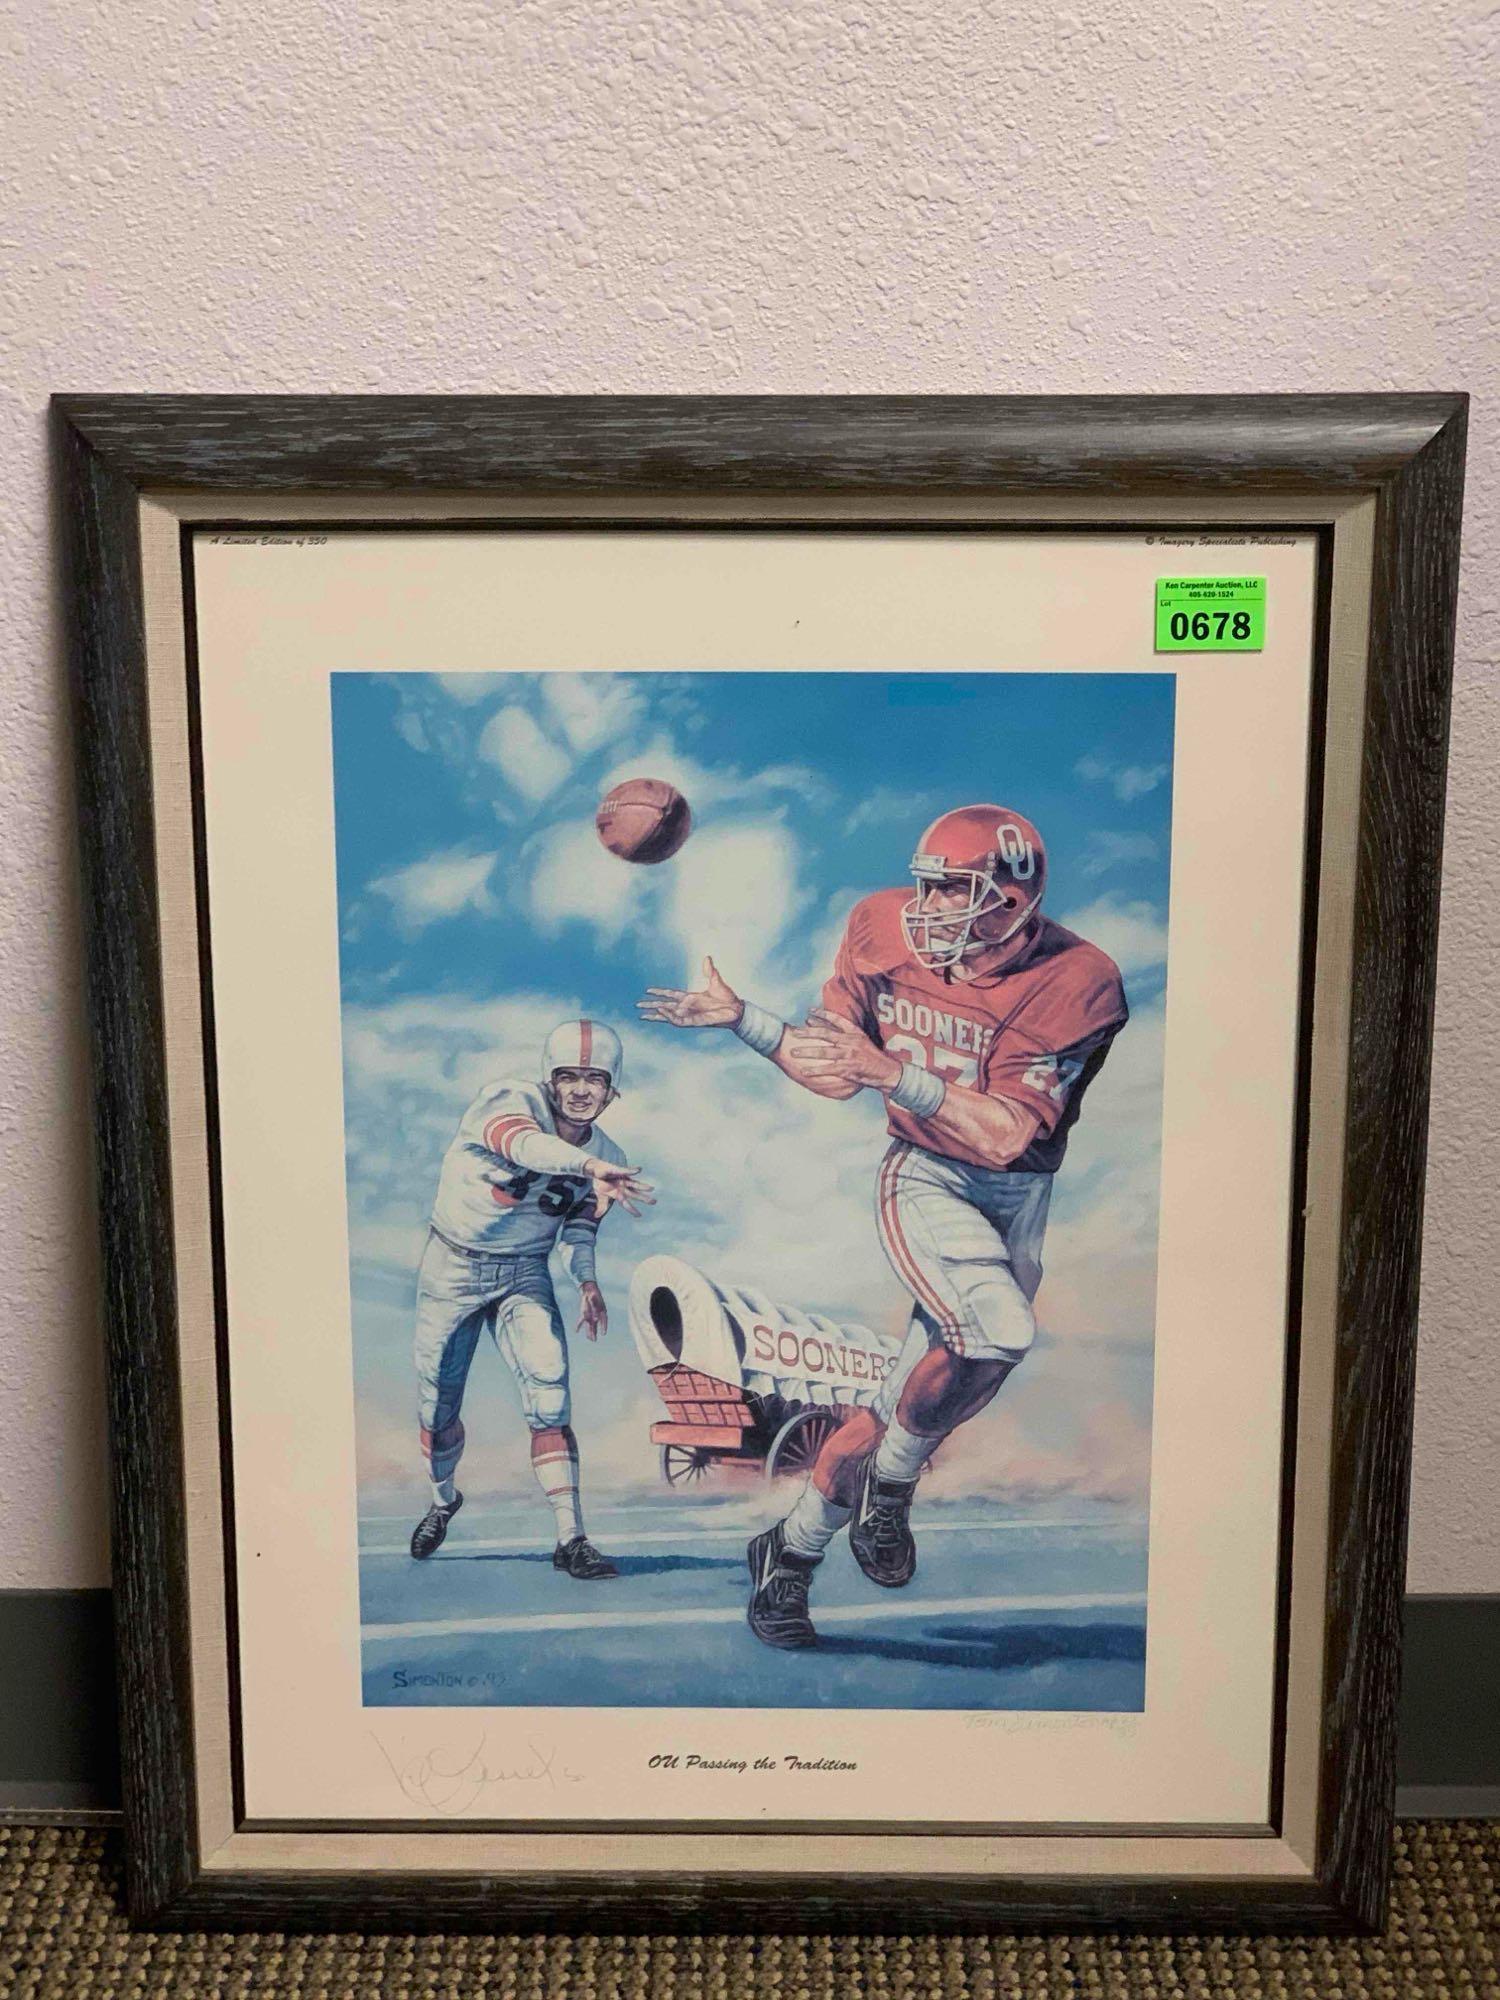 OU Passing the Tradition Autographed Print